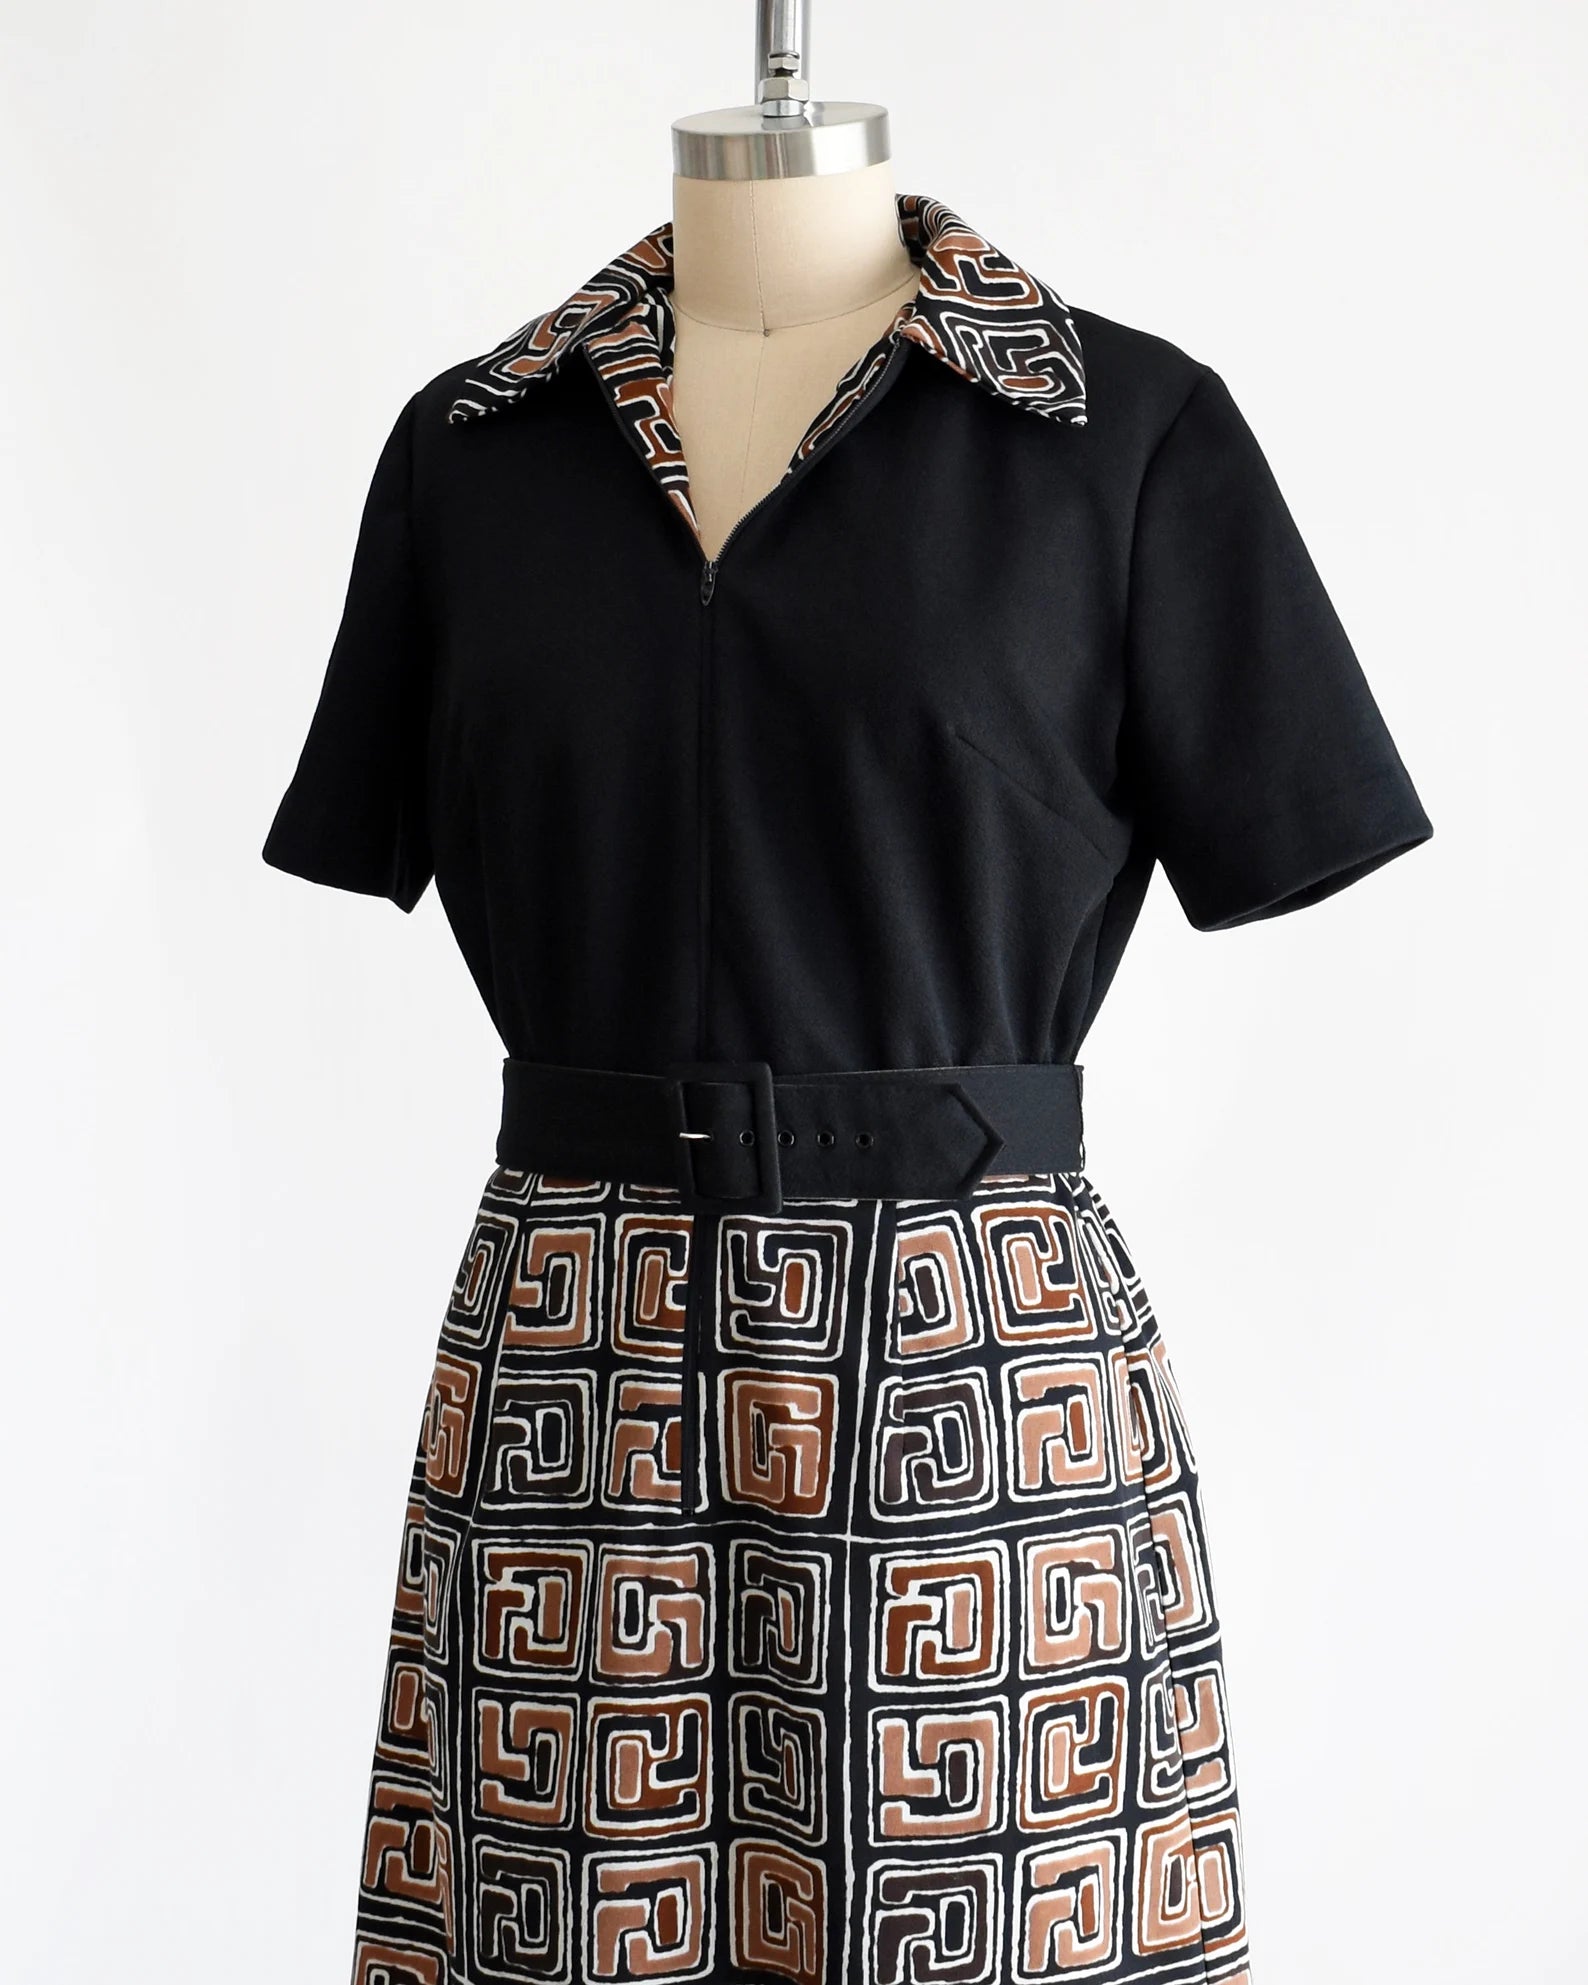 Side front view of a vintage 60s dress that has a matching geometric print brown, black and white collar and skirt. Zip up front that is zipped down a bit showing more of the collar. Matching black belt. Short sleeves. The dress is on a dress form.